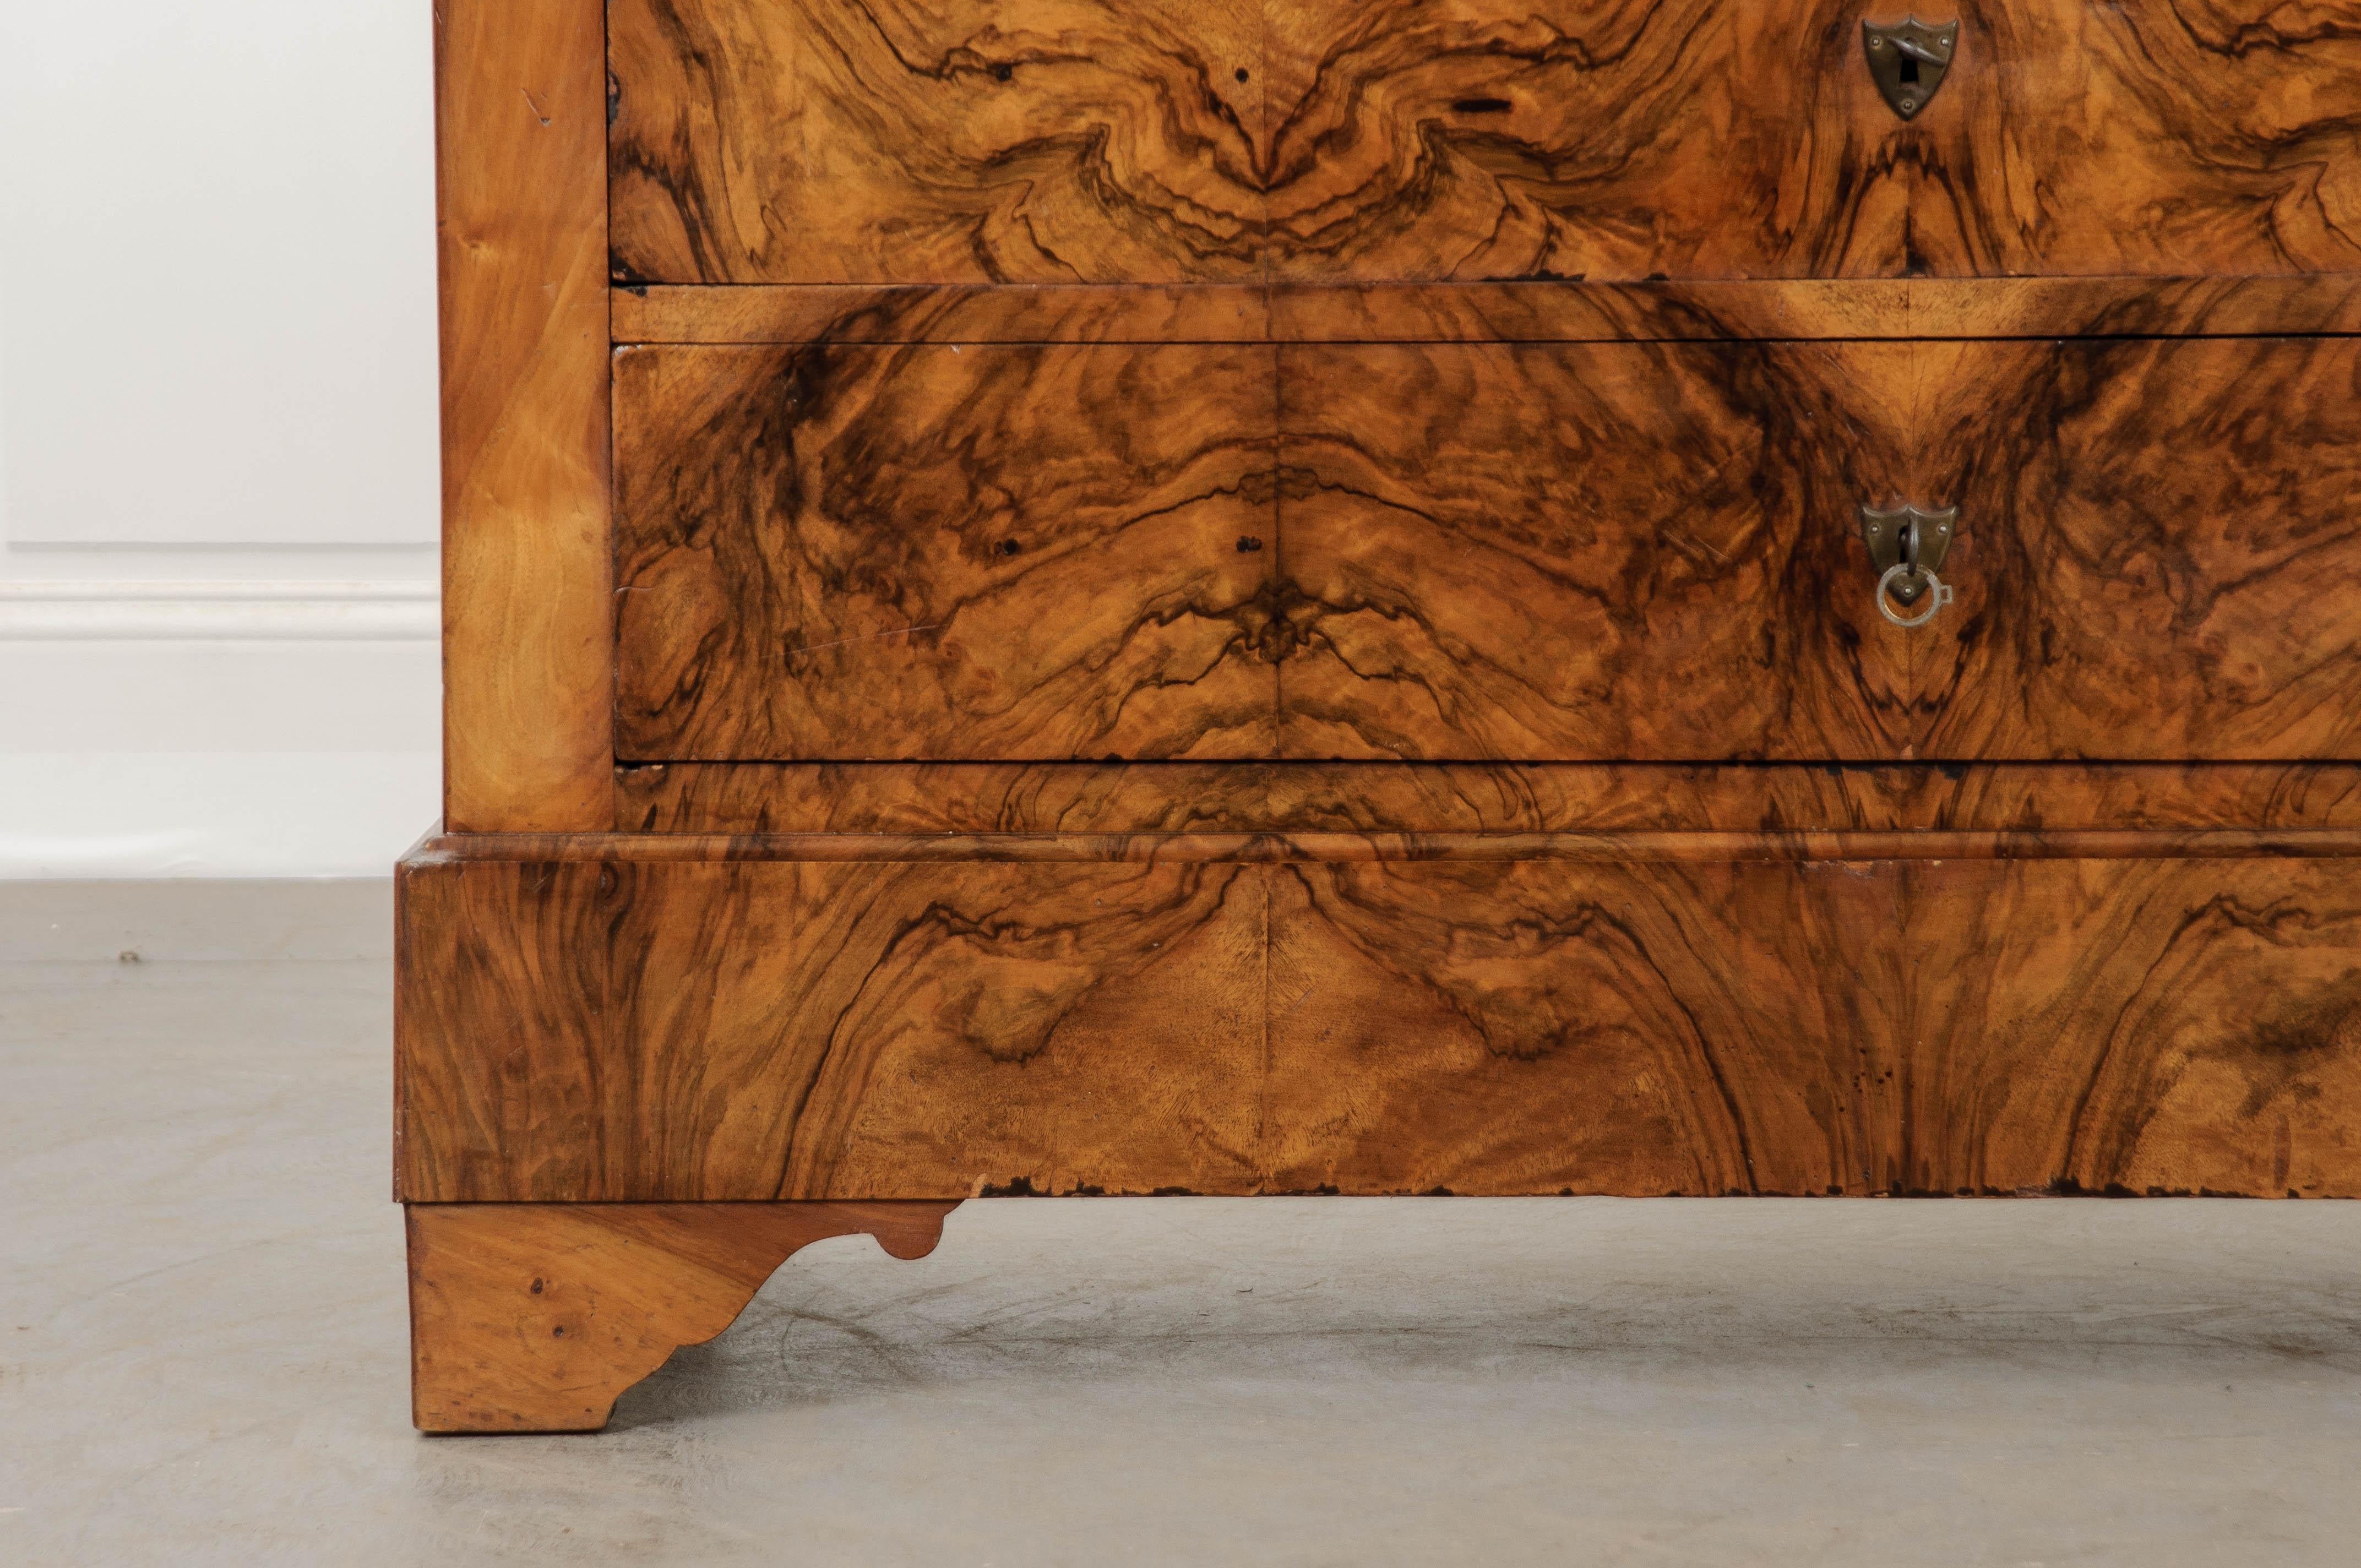 Beautifully book matched burl walnut veneer was mindfully selected when creating this exceptional four-drawer Louis Philippe style commode from 19th century France. This wonderful burl is actually caused by the knots, gnarls and deformities that are